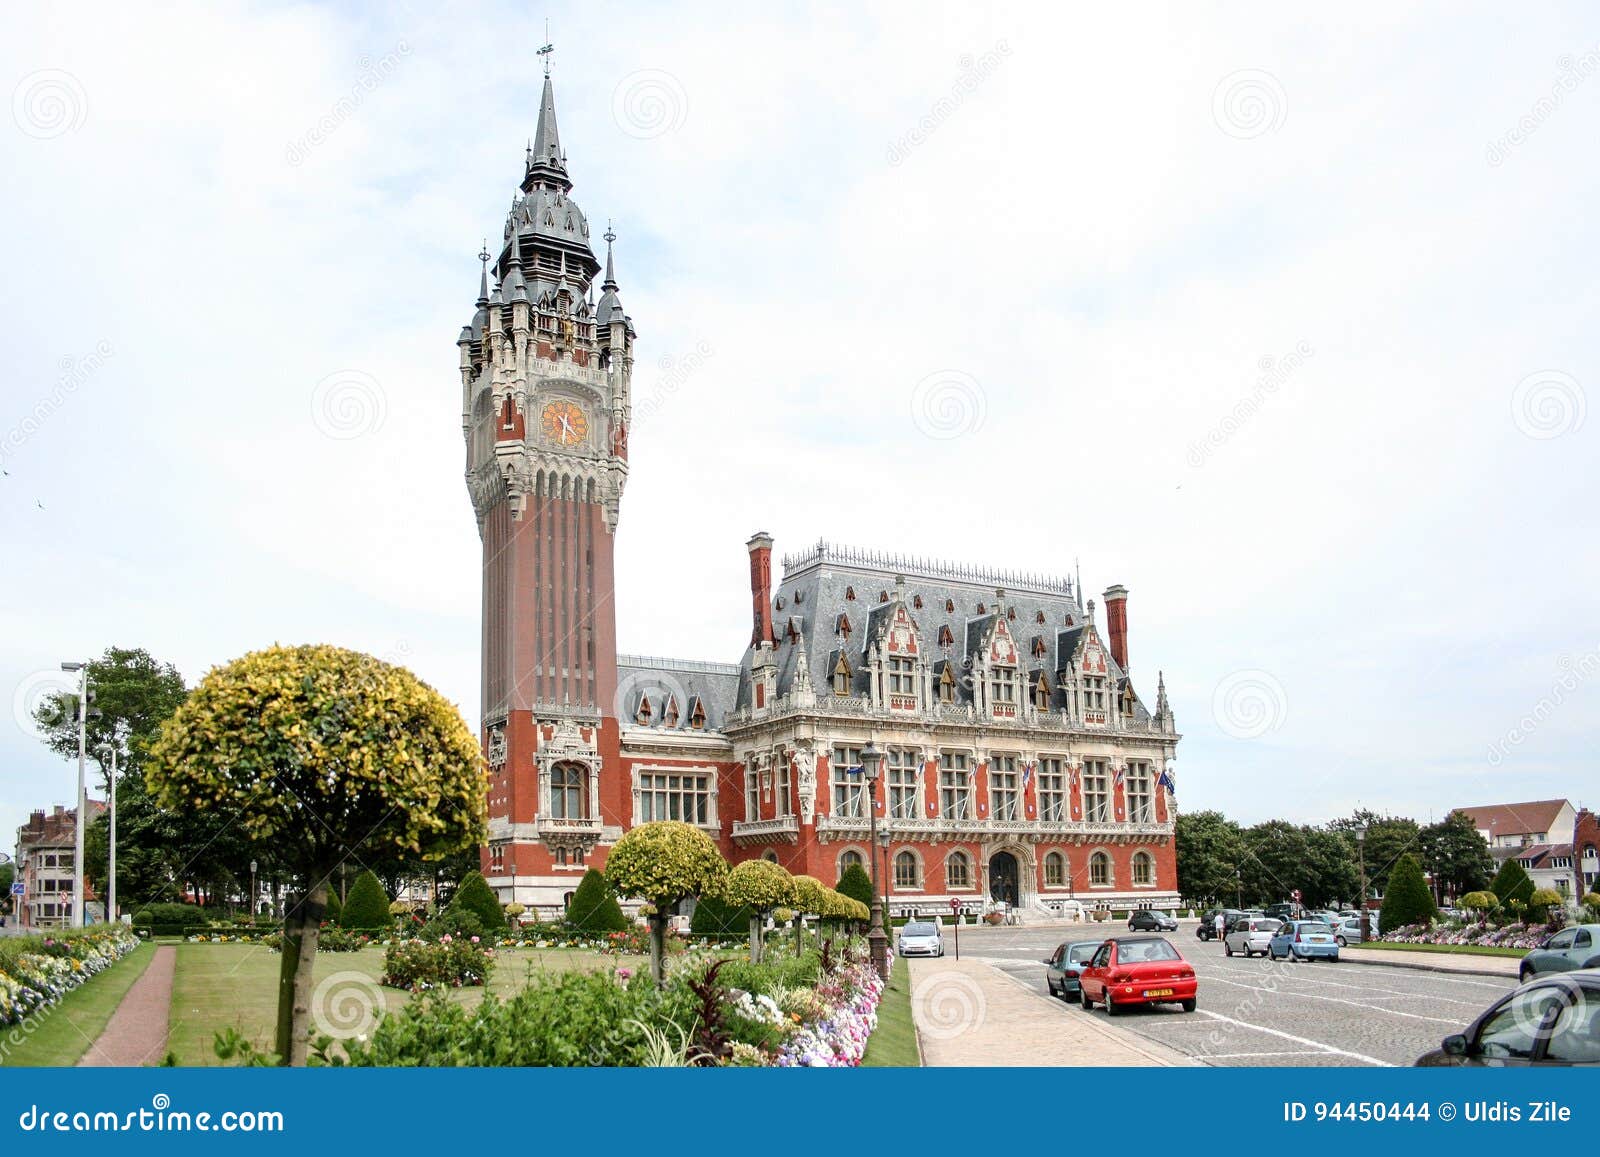 Calais france editorial stock image. Image of feature - 94450444